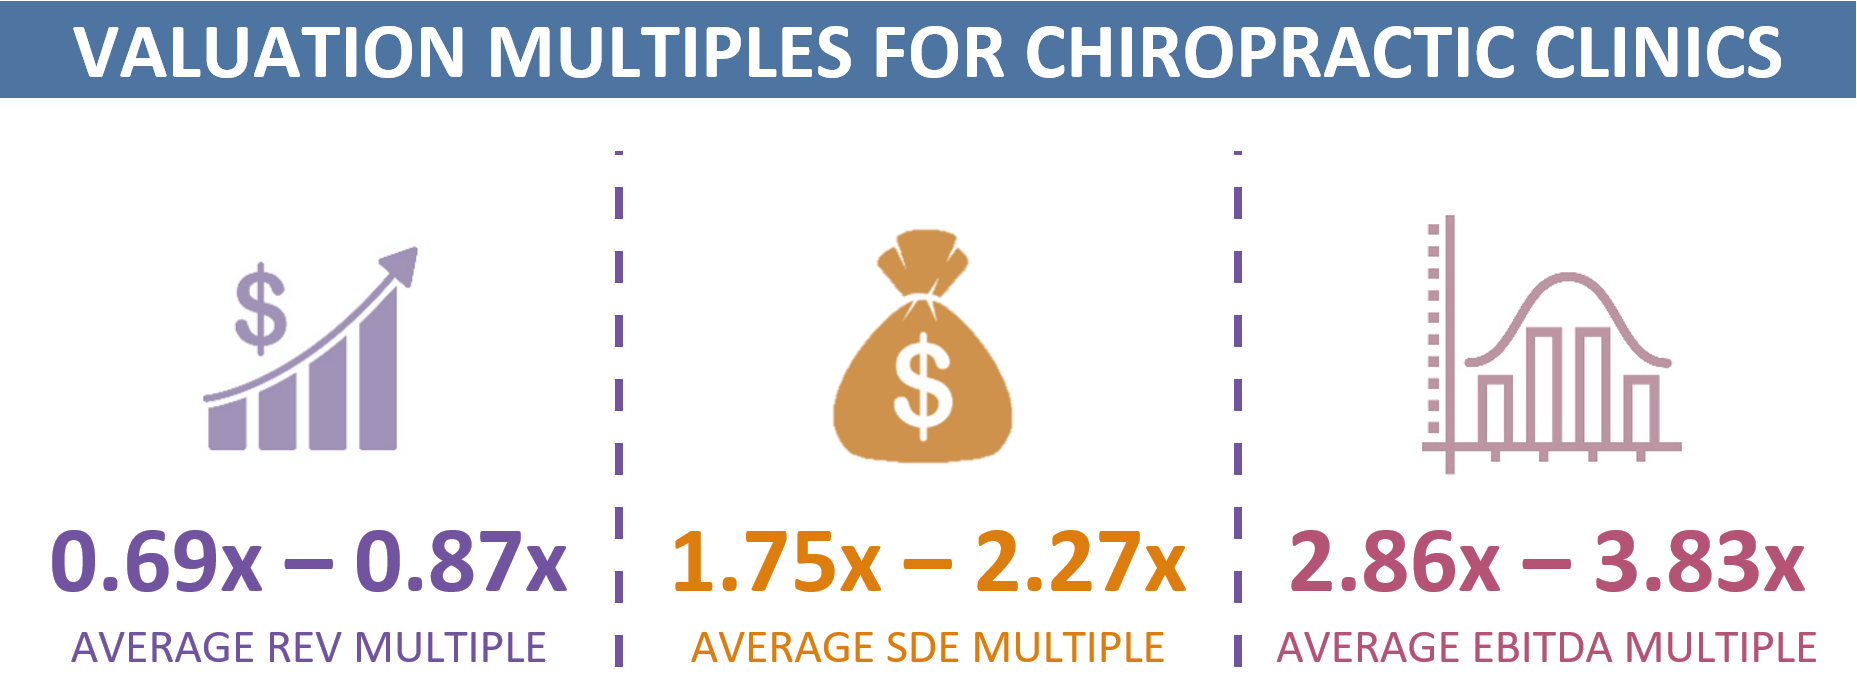 Valuation Multiples For Chiropractic Offices